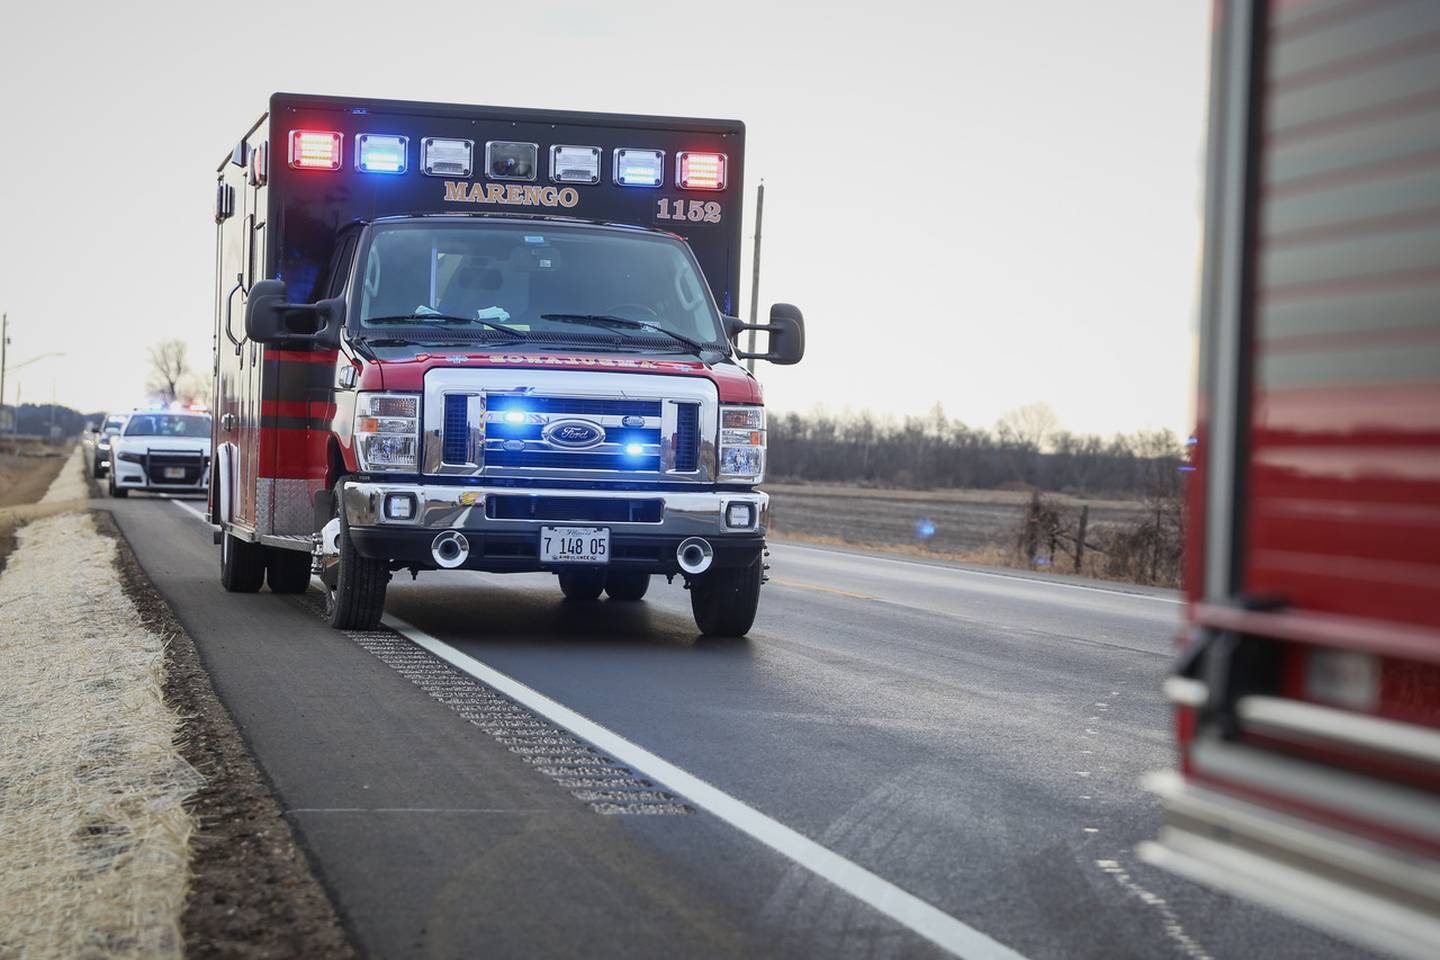 The Marengo Fire & Rescue District responded Thursday Dec. 23, 2021 near the intersection of Kishwaukee Valley Road and Noe Road near Marengo for a single-vehicle rollover crash.